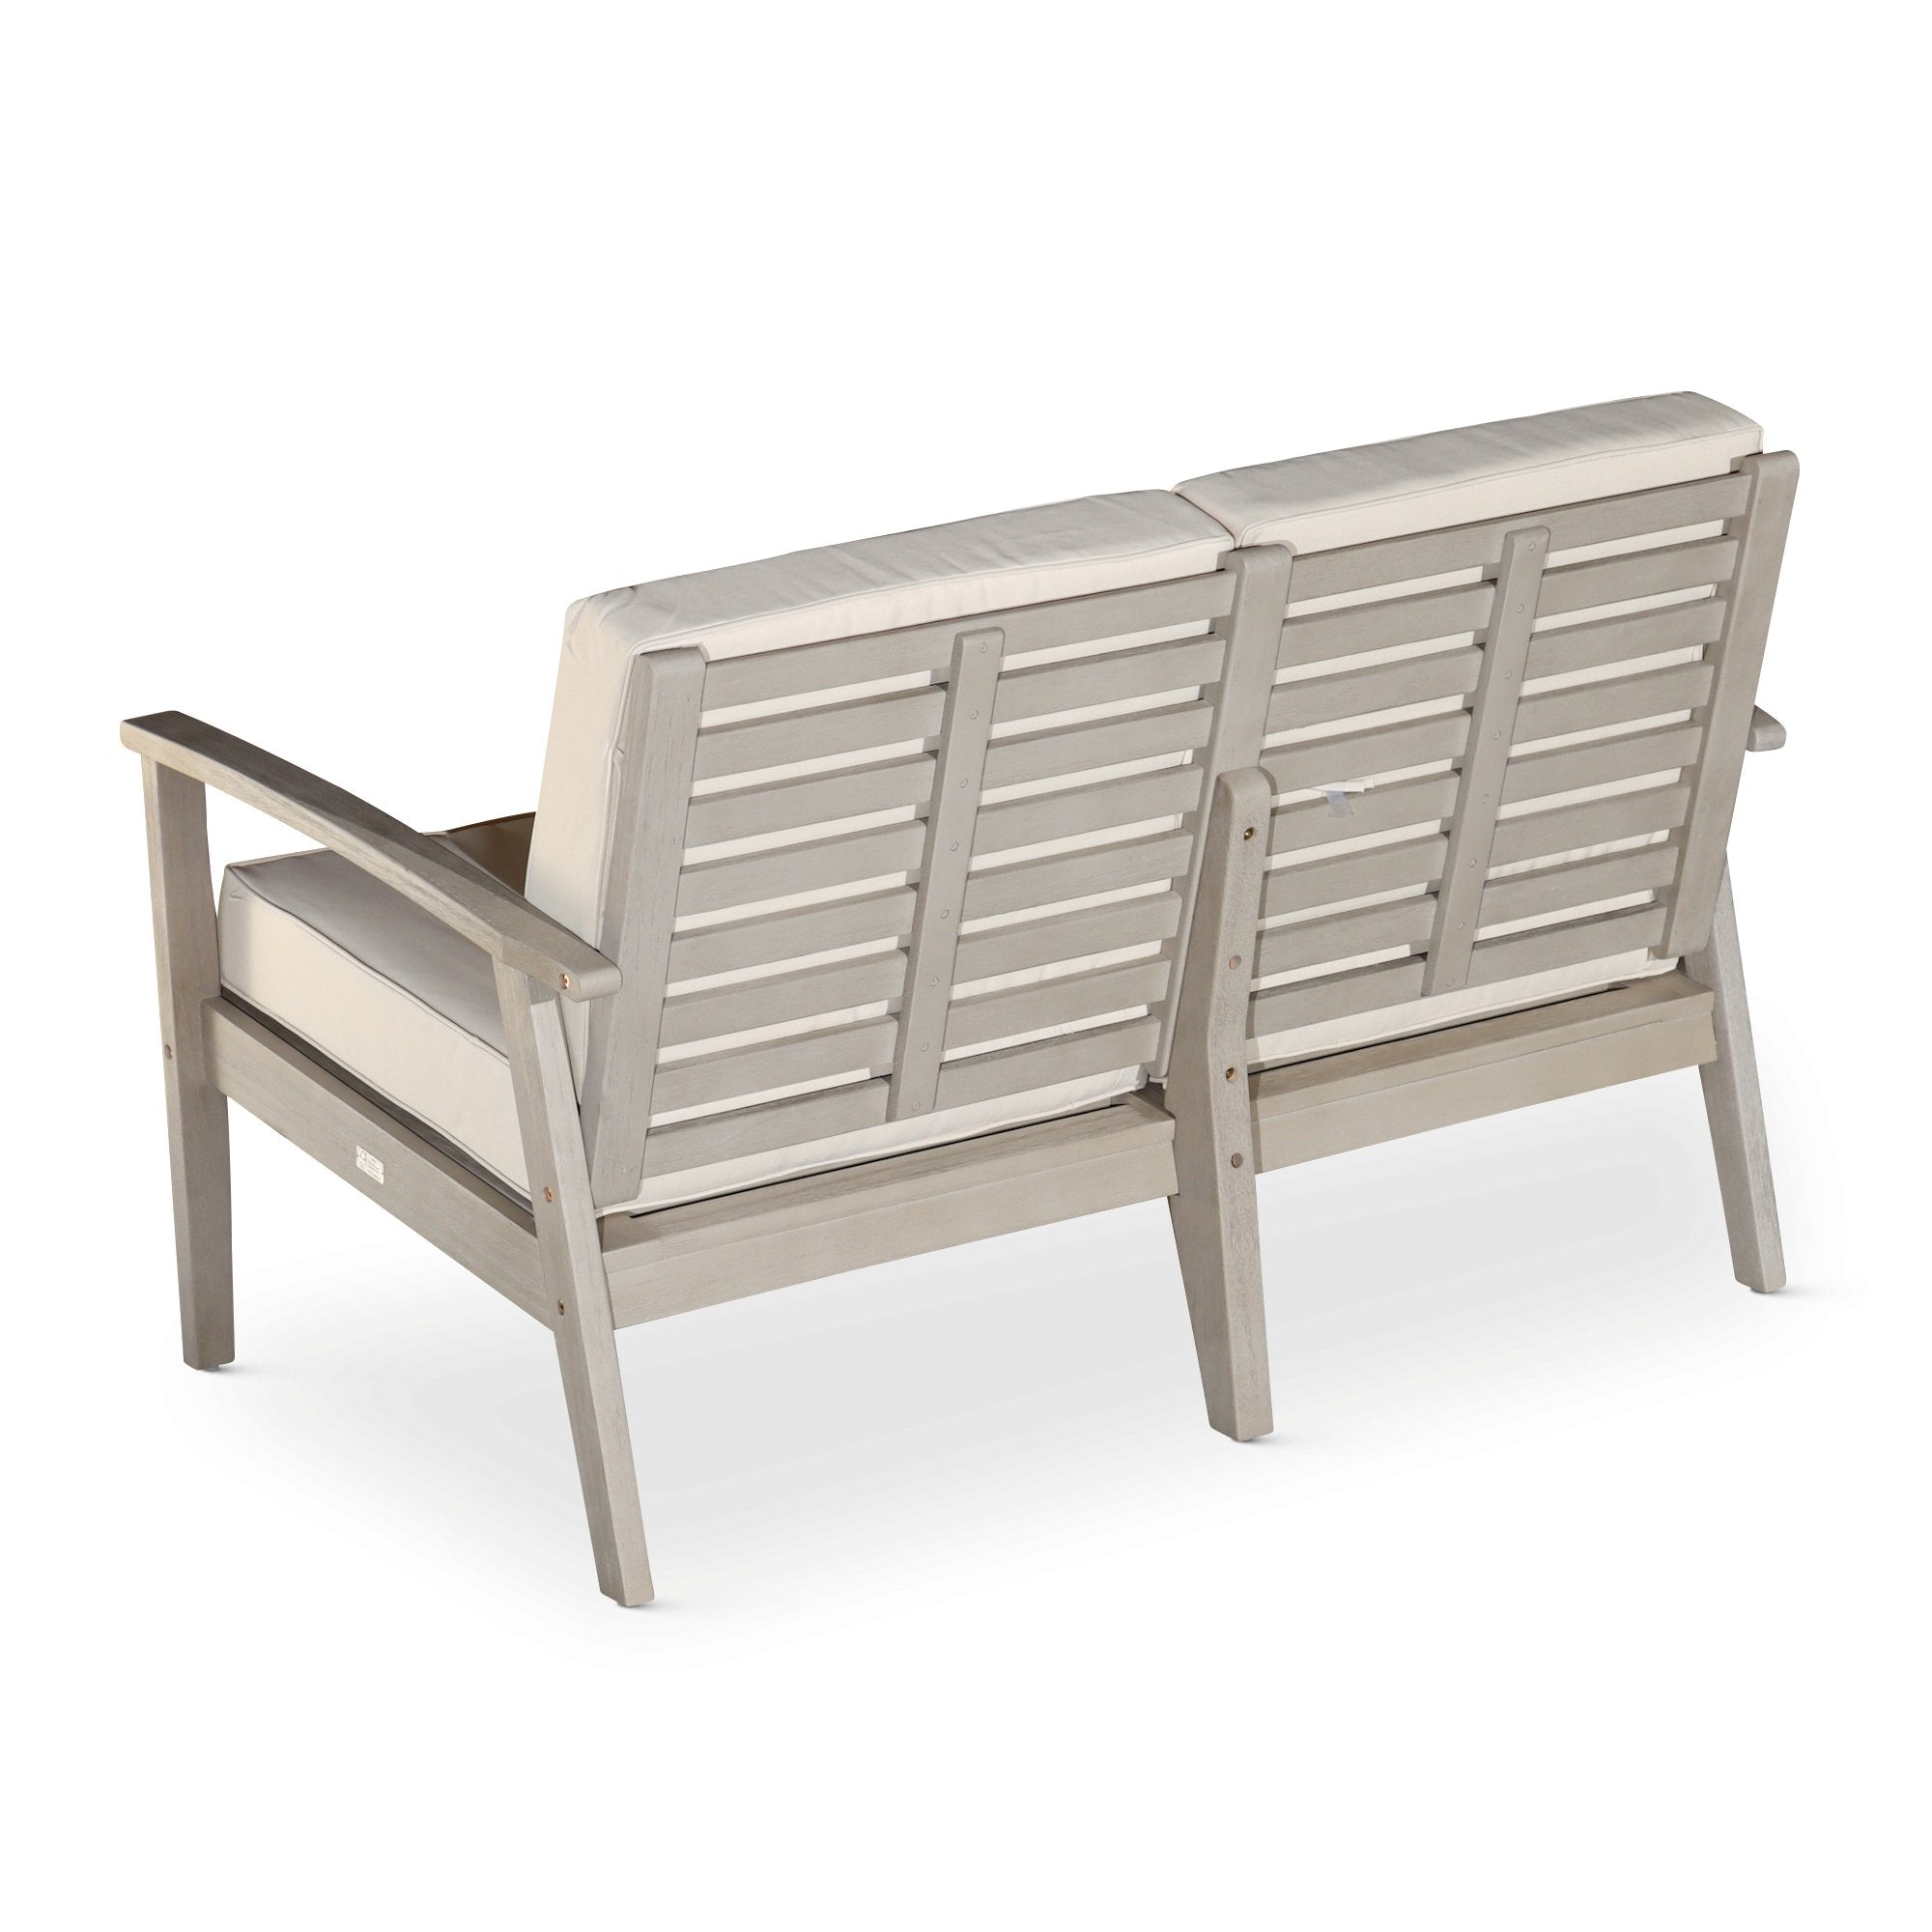 Outdoor Loveseat with Cushions, Driftwood Gray Finish, Navy Cushions - Tuesday Morning-Chairs & Seating